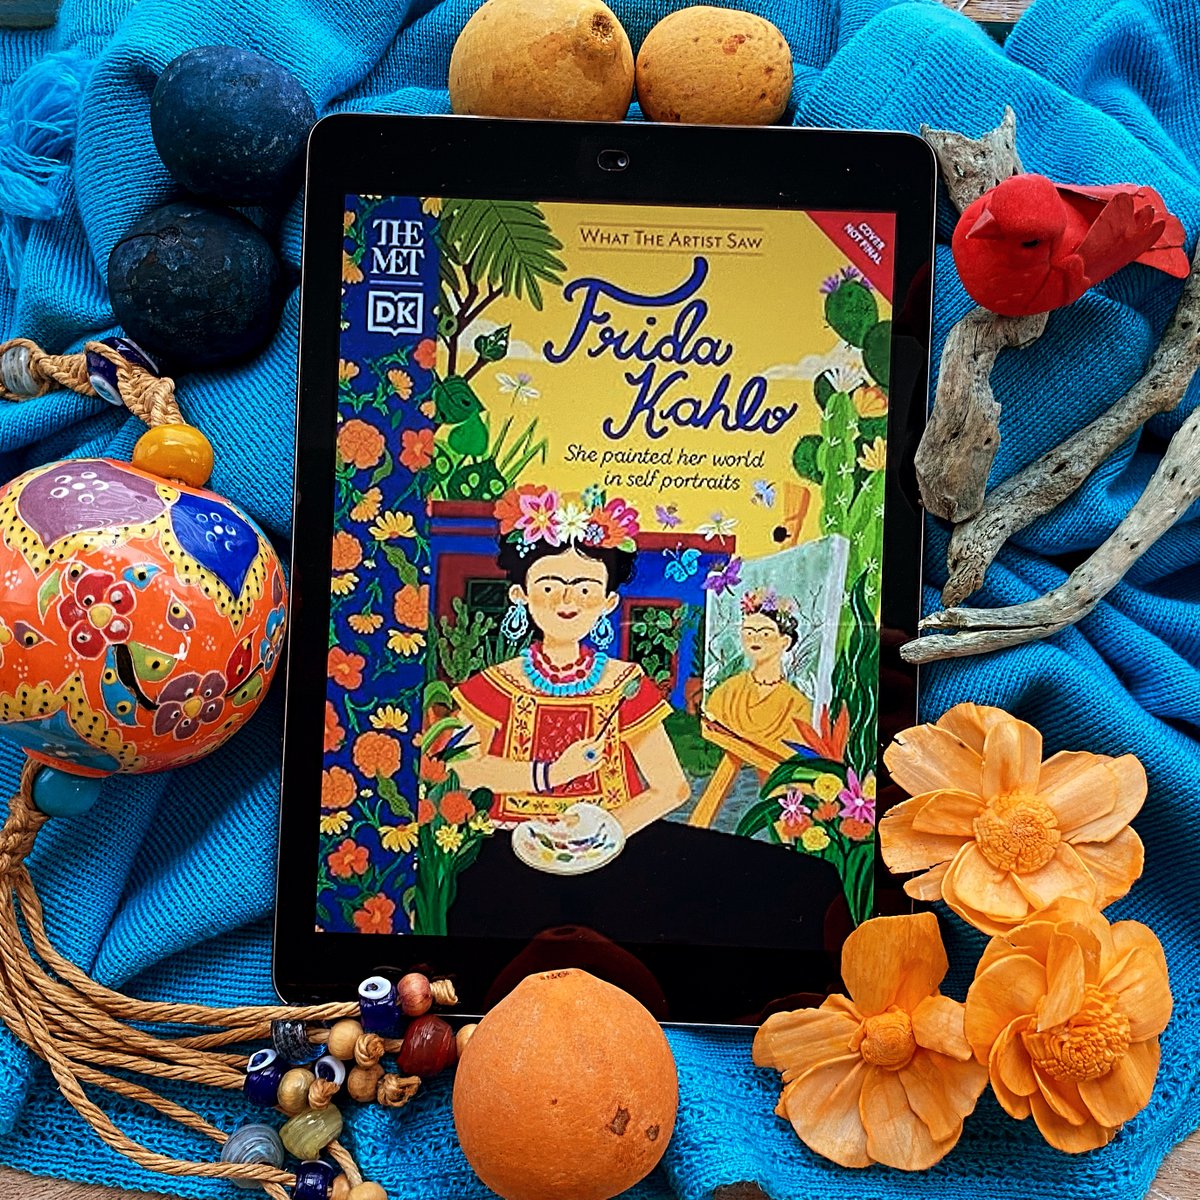 TRENDING INSPIRATION: Be Authentic. Stay true to yourself. #FridaKahlo - her colorful surroundings and supportive parents influenced her to become an original artist. @dkpublishing biopurposeland.blogspot.com/2024/02/the-me…